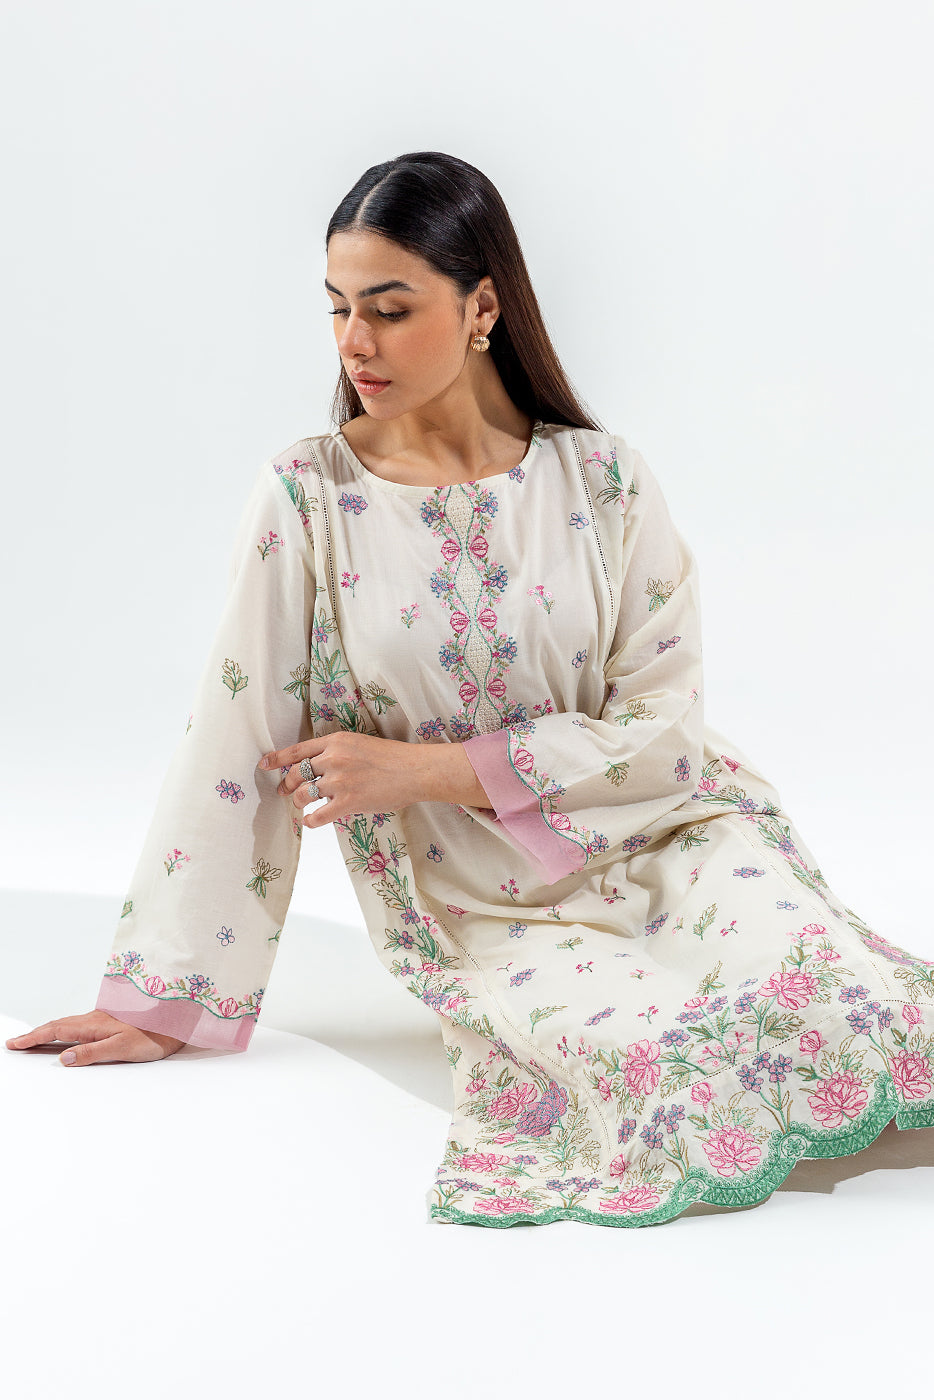 2 PIECE EMBROIDERED DYED LAWN SUIT (PRET) - BEECHTREE